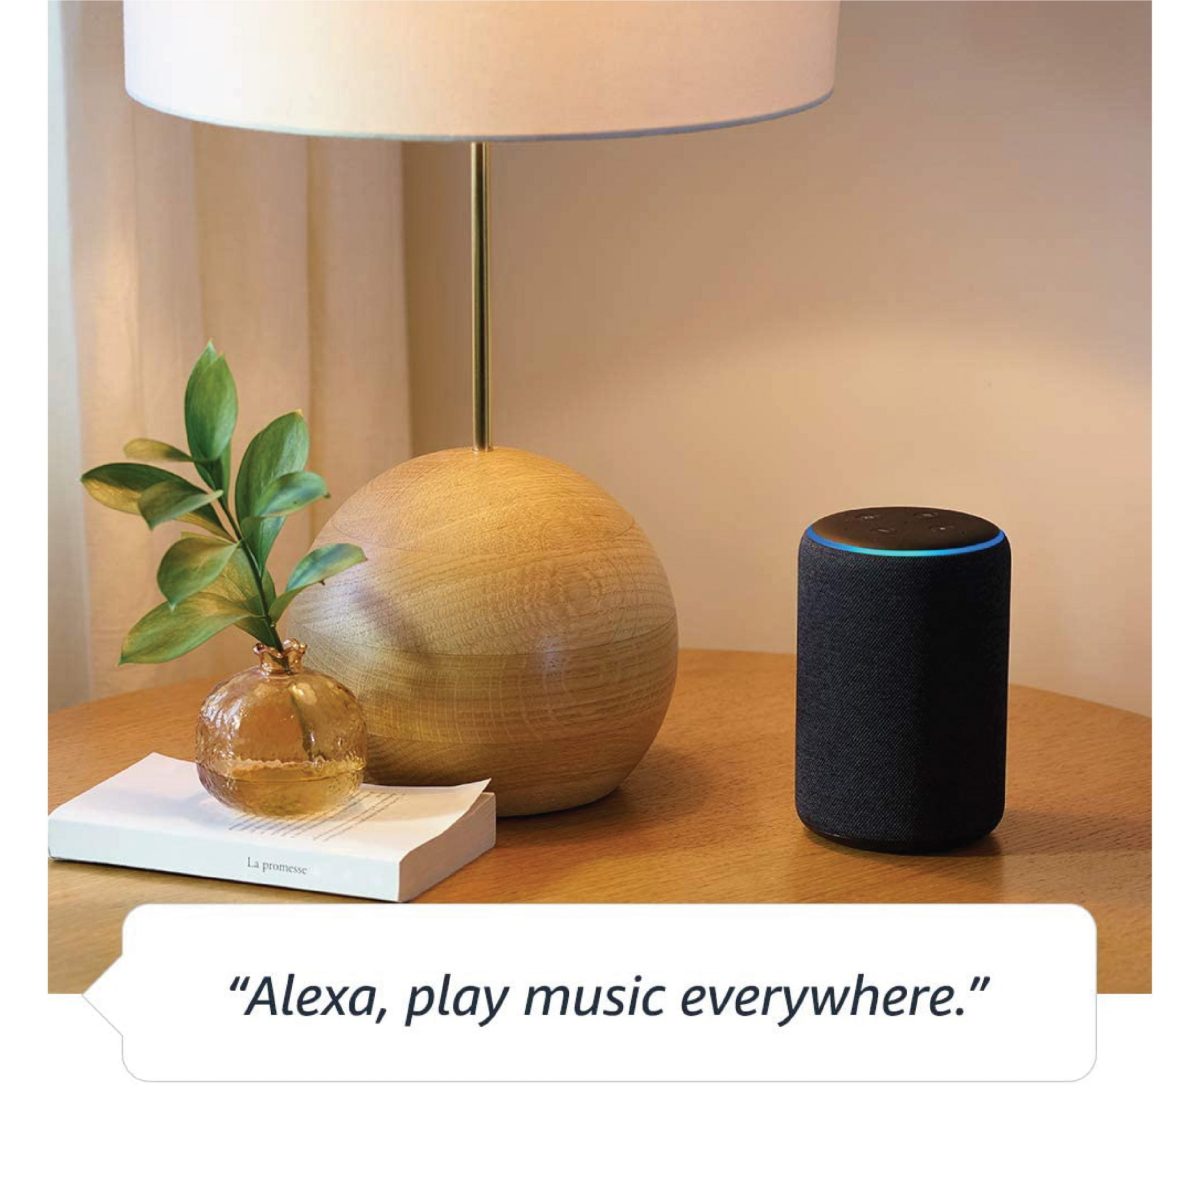 Adasd2X 03 Scaled Amazon Echo Plus Connects To Alexa And Can Simply Set Up And Voice-Control Compatible Smart Home Devices. Play Music Powered By Dolby From Your Favourite Streaming Services. Just Ask Alexa To Play Music, Read The News, Check Weather Forecasts, Set Alarms And Timers, Control Smart Home Devices, Call Echo Devices, And More. Alexa Is Always Getting Smarter And Adding New Features And Skills. &Lt;Ul&Gt; &Lt;Li&Gt;1 Internal Speaker.&Lt;/Li&Gt; &Lt;Li&Gt;3.5Mm Aux In.&Lt;/Li&Gt; &Lt;Li&Gt;2 Amplifier Channels.&Lt;/Li&Gt; &Lt;Li&Gt;Frequency 70Hz-20000Hz.&Lt;/Li&Gt; &Lt;Li&Gt;Size H14.85, W9.92, D9.92Cm.&Lt;/Li&Gt; &Lt;/Ul&Gt; [Video Width=&Quot;1024&Quot; Height=&Quot;576&Quot; Mp4=&Quot;Https://Lablaab.com/Wp-Content/Uploads/2020/04/9734Eb70-3880-47D1-9F7F-7958Db9F4054.Mp4&Quot;][/Video] Echo Plus (2Nd Gen) - Premium Sound With Built-In Smart Home Hub - Heather Gray